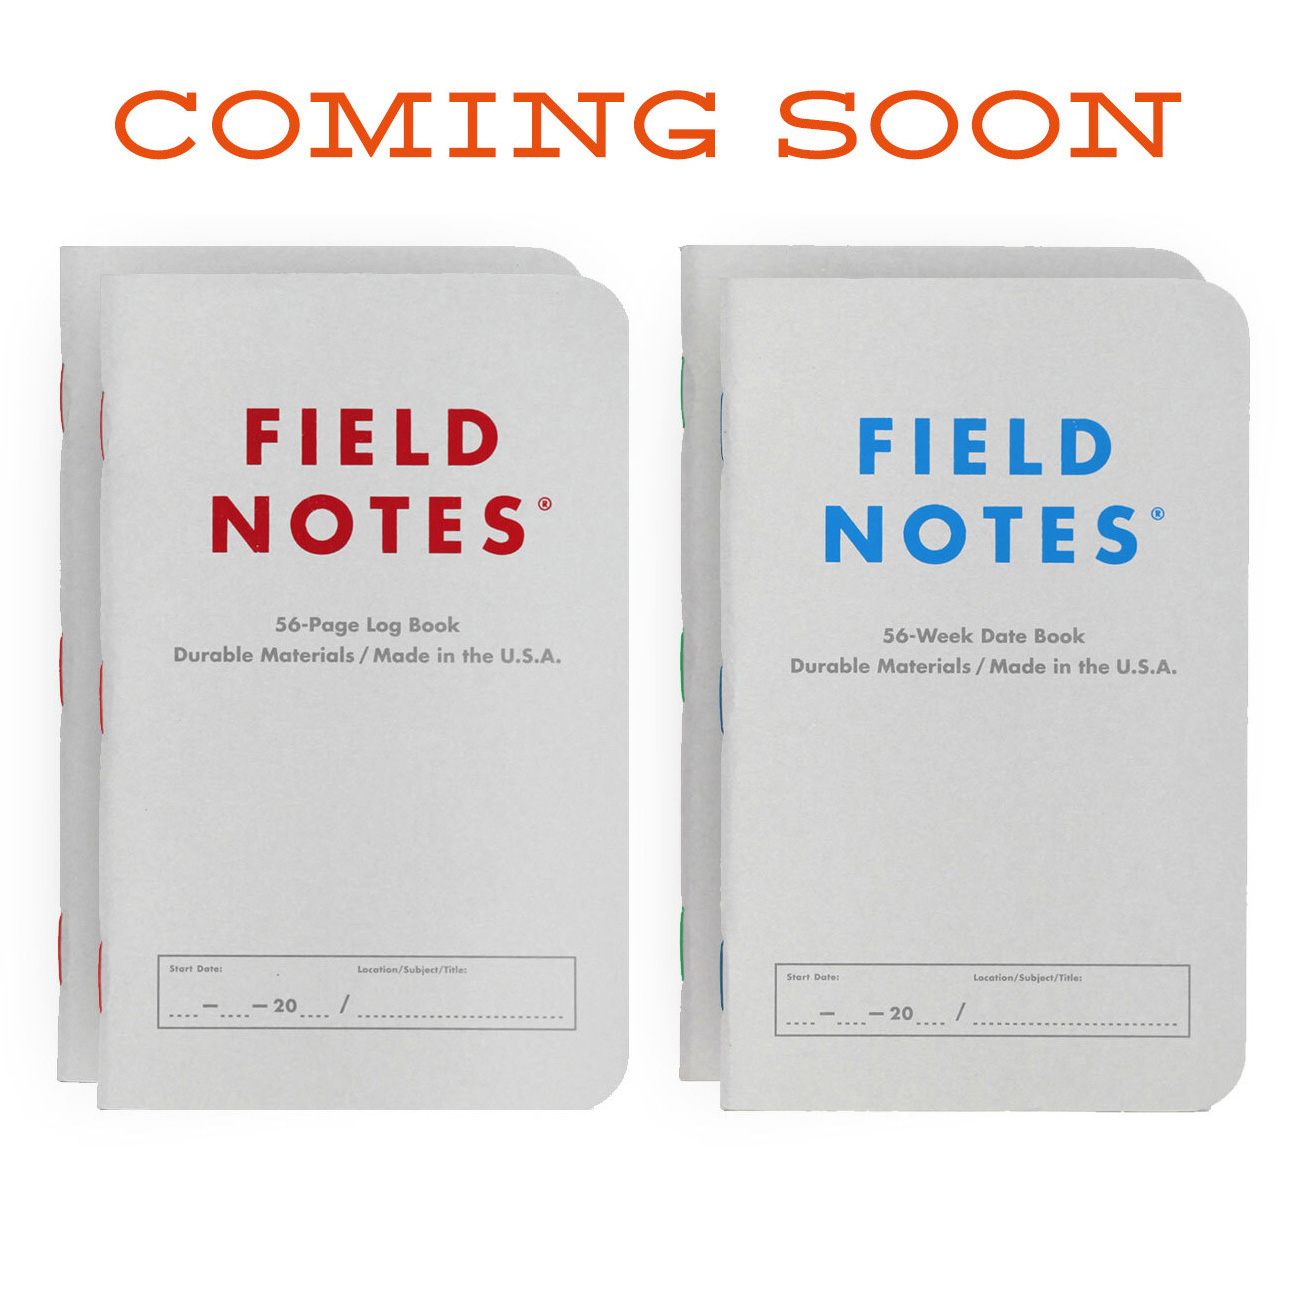 FIELD NOTES – INDEX